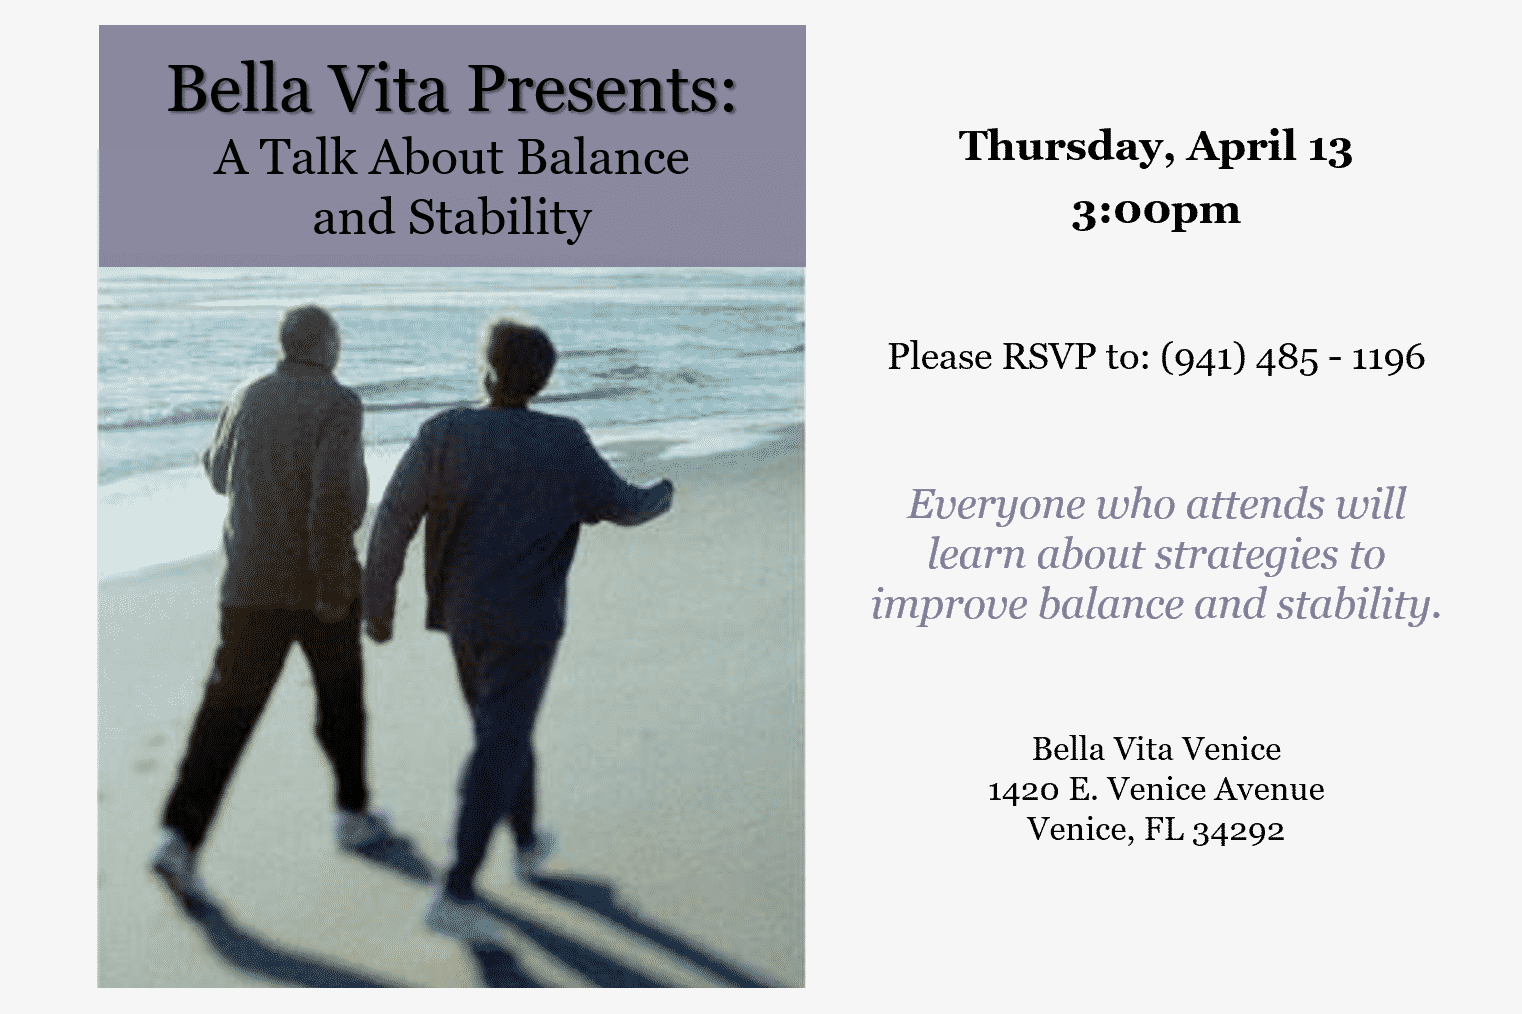 Learn About Balance And Stability @ Bella Vita